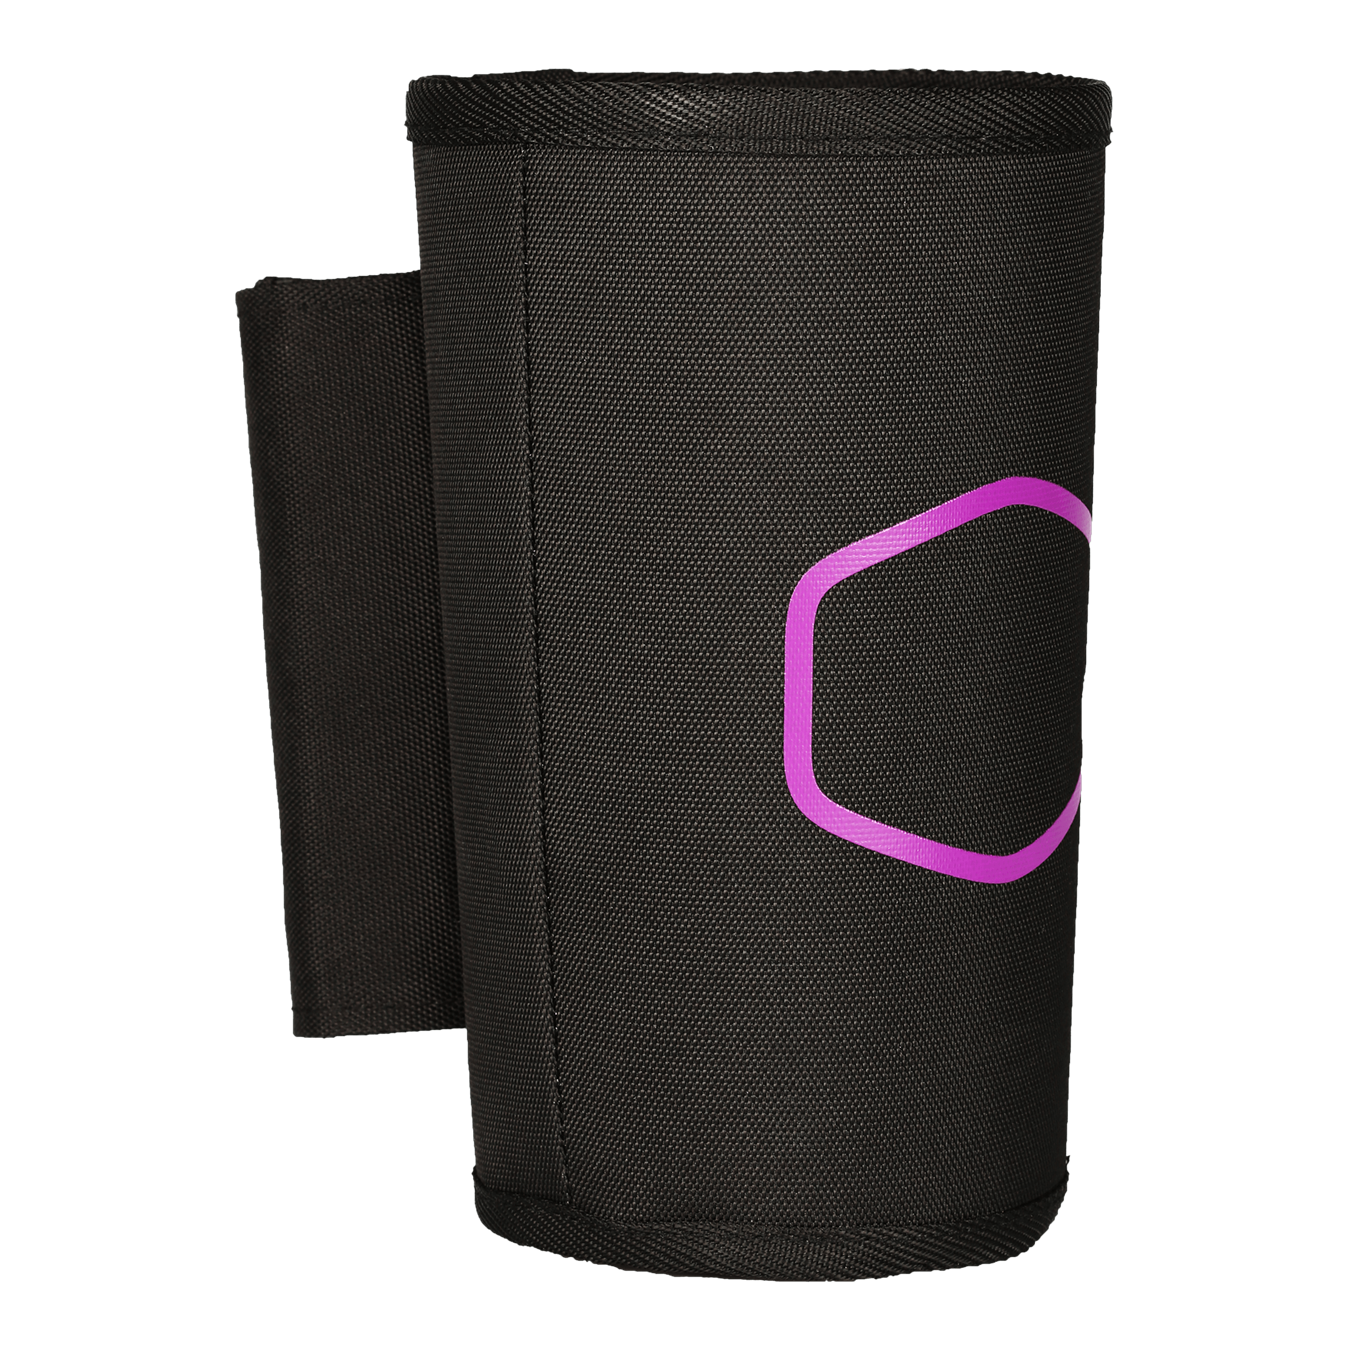 CH510 Cup Holder - It’s the perfect companion for your chair that loads your water bottle or chocolate bars safely in place.